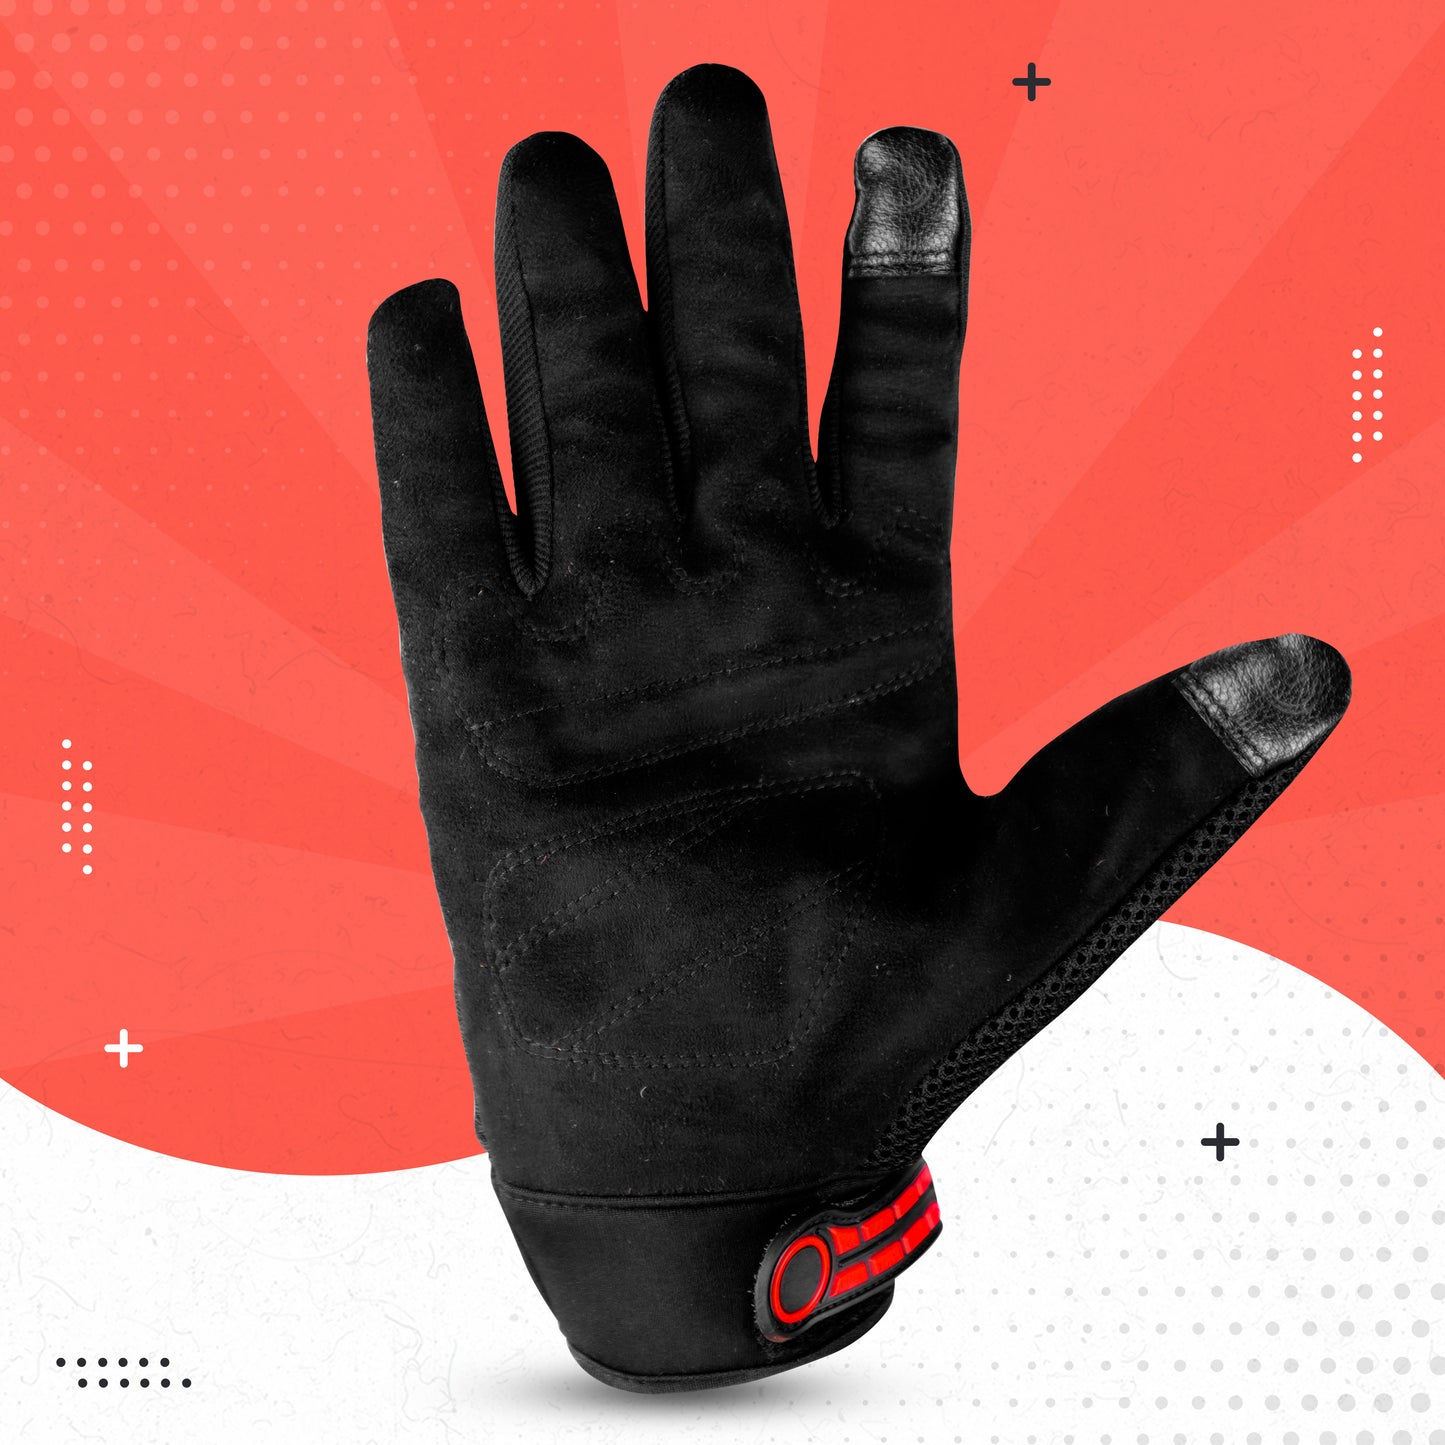 Steelbird Adventure A-2 Full Finger Bike Riding Gloves with Touch Screen Sensitivity at Thumb and Index Finger, Protective Off-Road Motorbike Racing (Red)